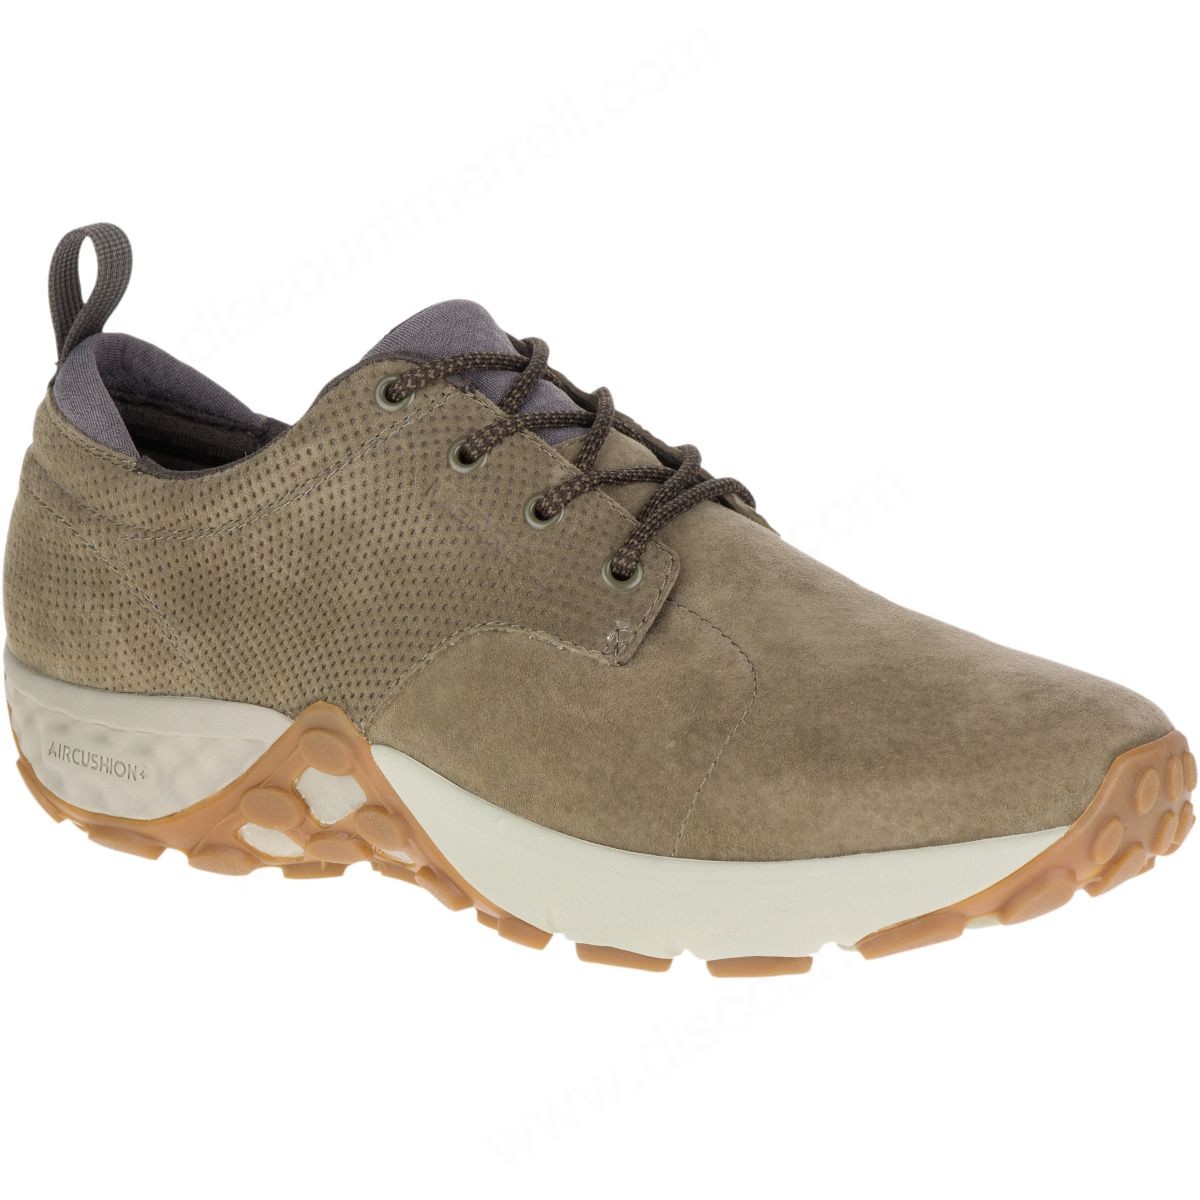 Merrell Mens's Jungle Lace Ac+ Dusty Olive - Merrell Mens's Jungle Lace Ac+ Dusty Olive